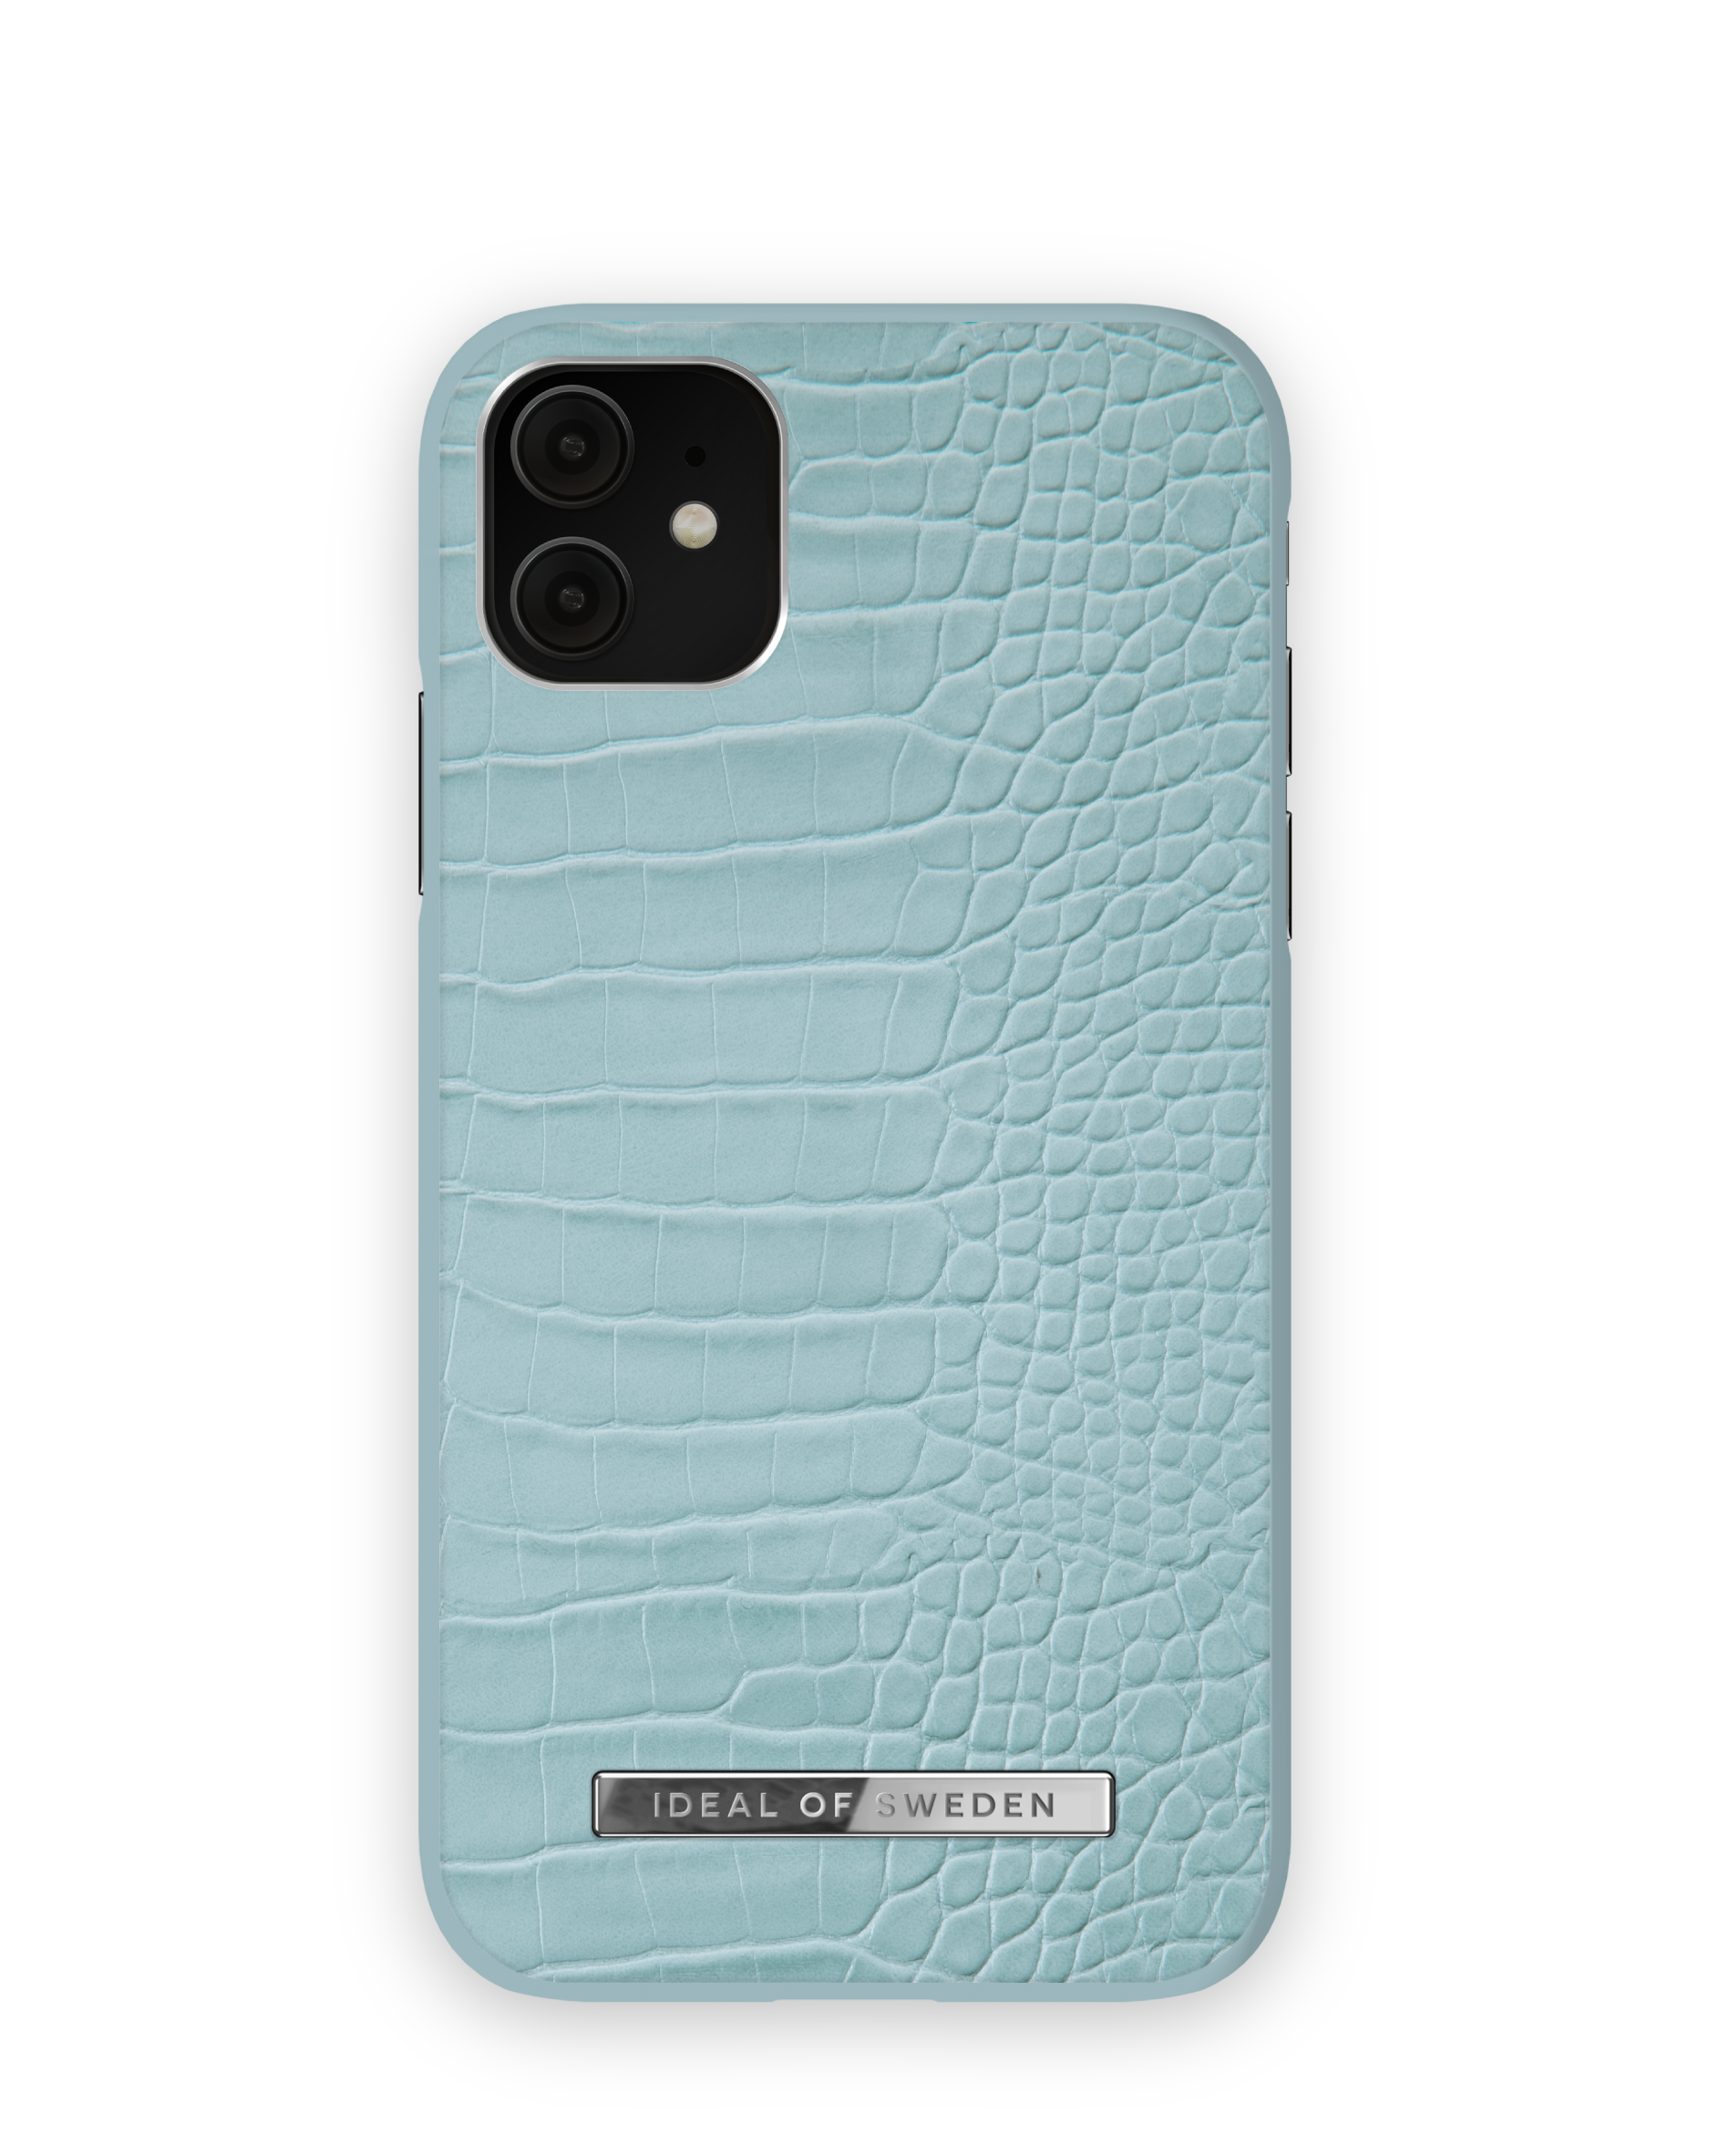 11 Blue / iPhone XR, IDACSS22-I1961-394, OF Soft Apple, iPhone IDEAL SWEDEN Croco Backcover,